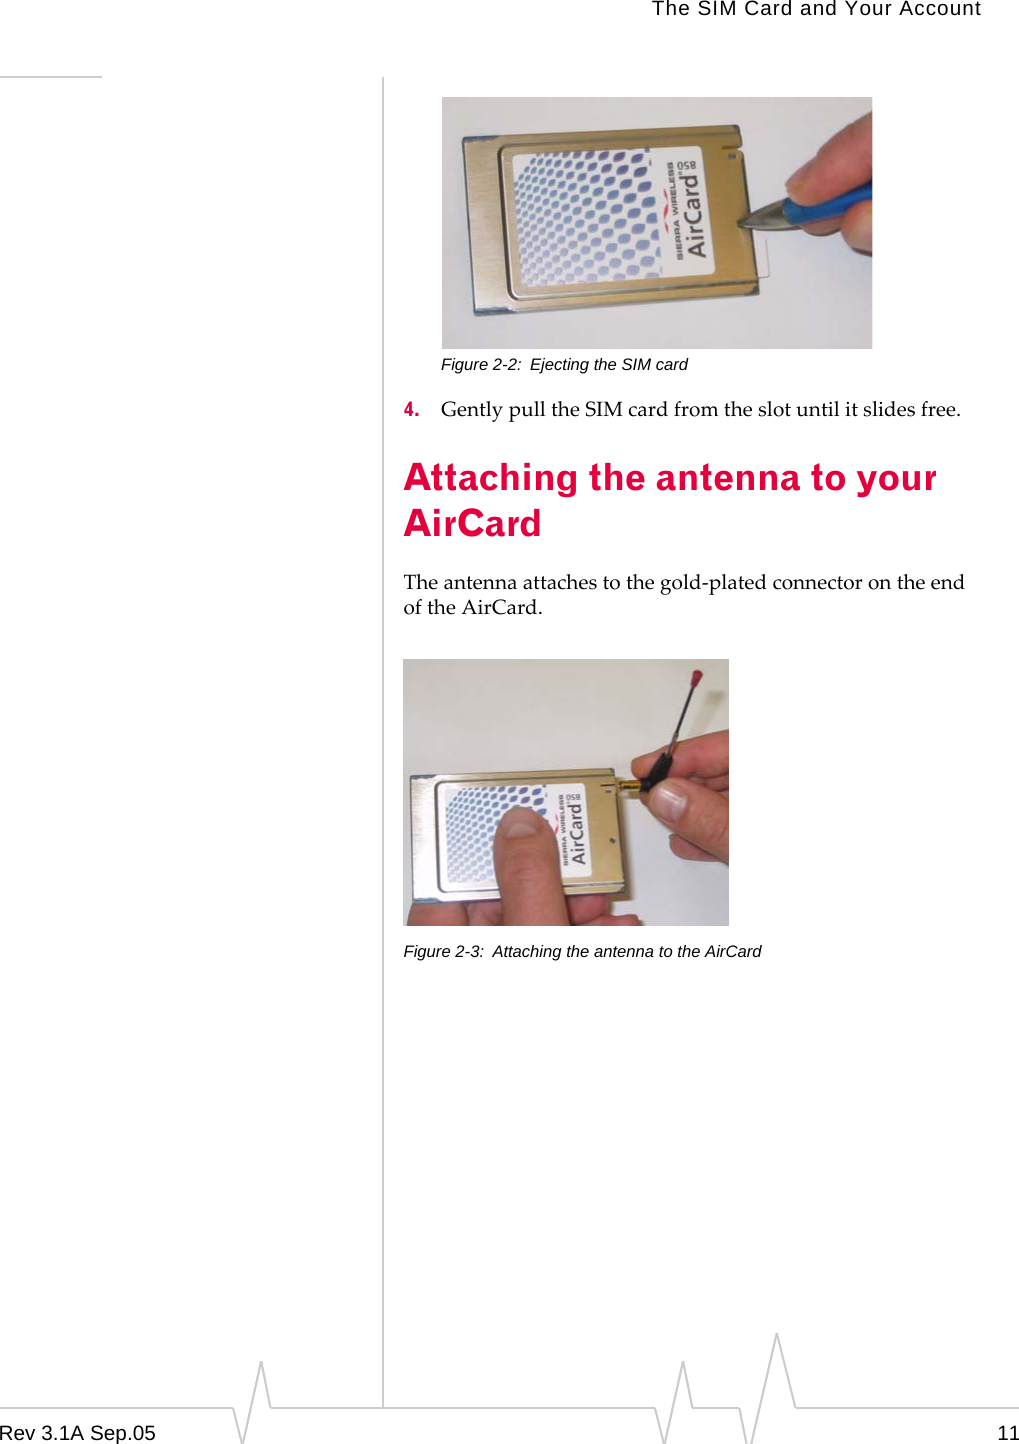 The SIM Card and Your AccountRev 3.1A Sep.05 11Figure 2-2: Ejecting the SIM card4. Gently pull the SIM card from the slot until it slides free.Attaching the antenna to your AirCardThe antenna attaches to the gold-plated connector on the end of the AirCard.Figure 2-3: Attaching the antenna to the AirCard